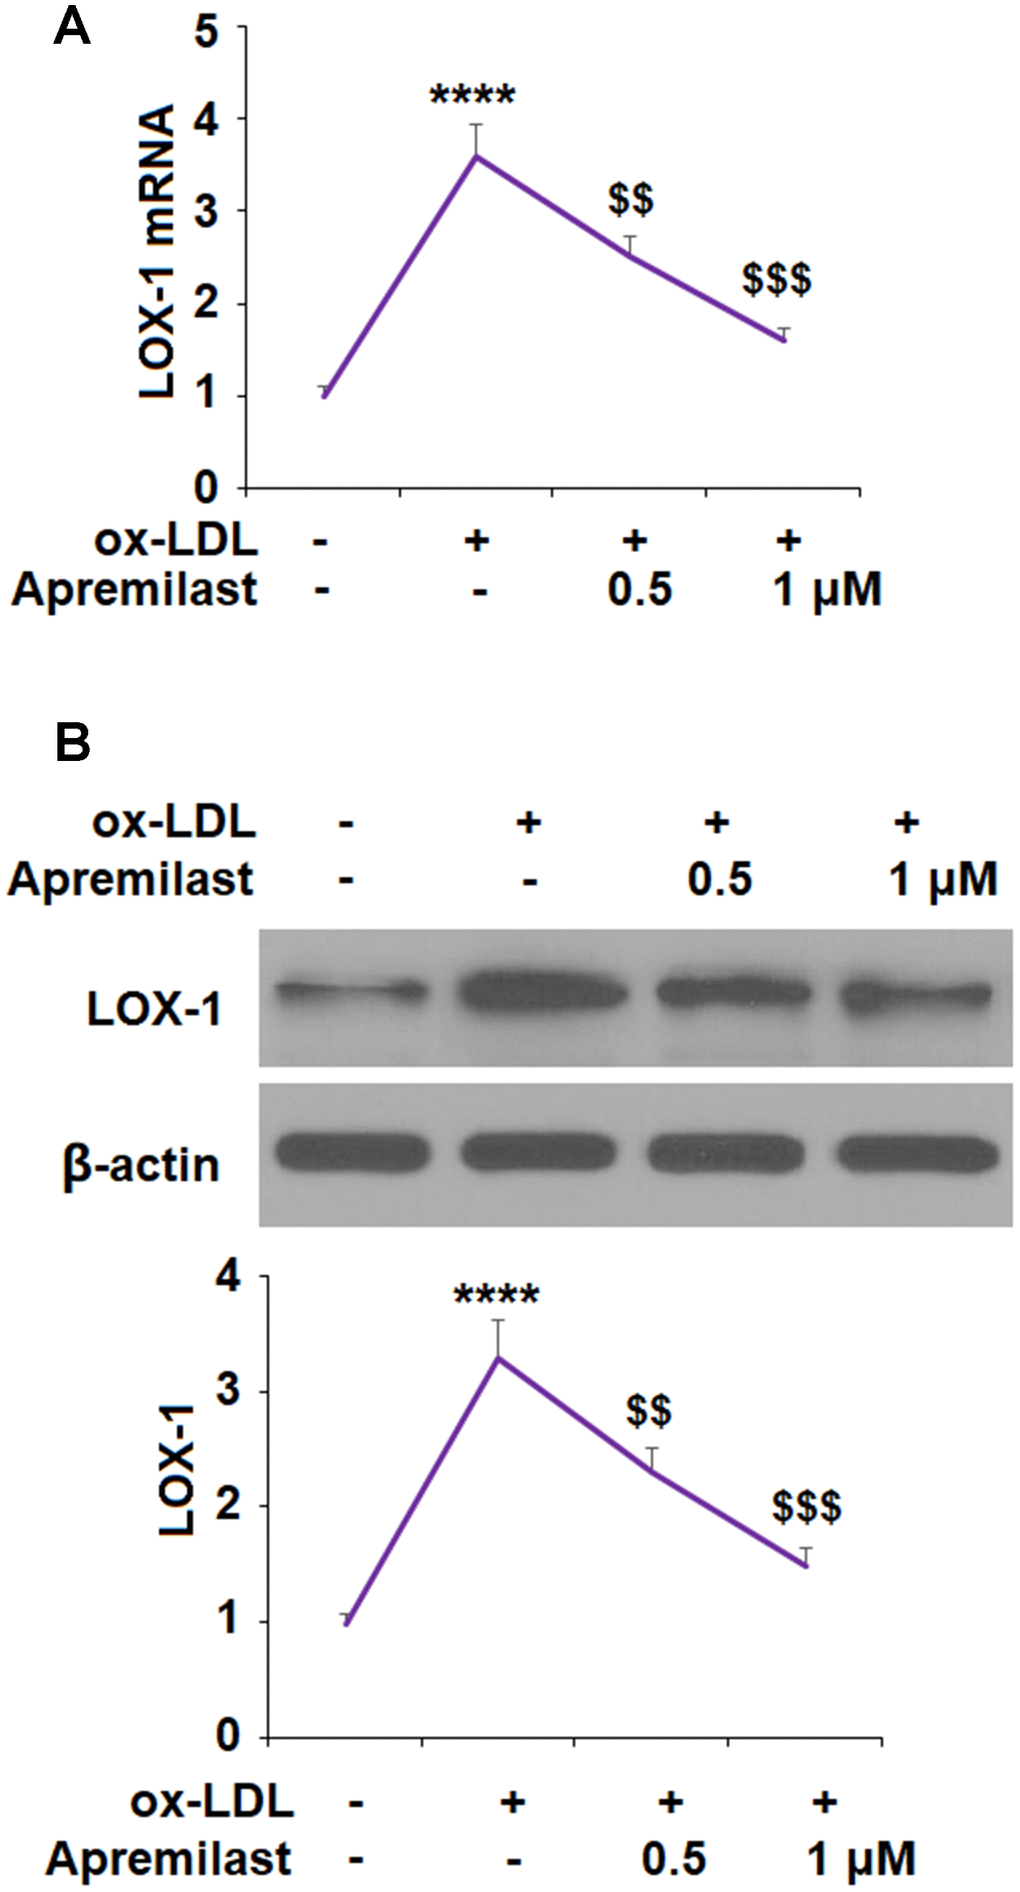 Apremilast reduced ox-LDL-induced expression of LOX-1 in HUVECs. Cells were treated with ox-LDL (100 μg/mL) in the presence or absence of apremilast (0.5, 1 μM) for 24 h. (A) mRNA of LOX-1; (B) Protein of LOX-1 (****, P